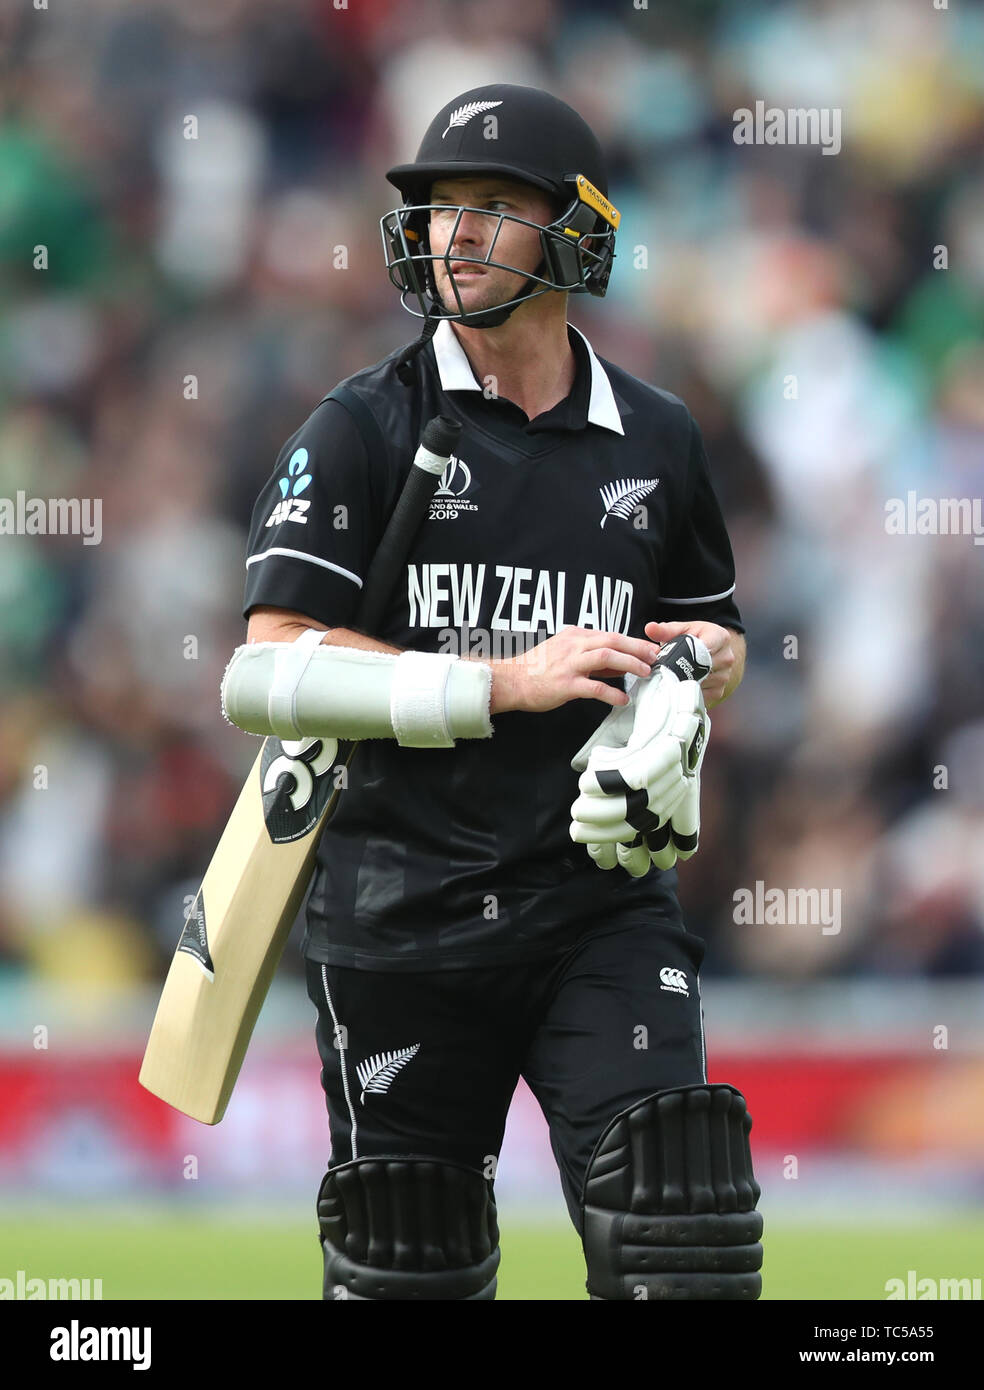 New Zealand's Colin Munro walks off after being dismissed during the ICC Cricket World Cup group stage match at The Oval, London. Stock Photo